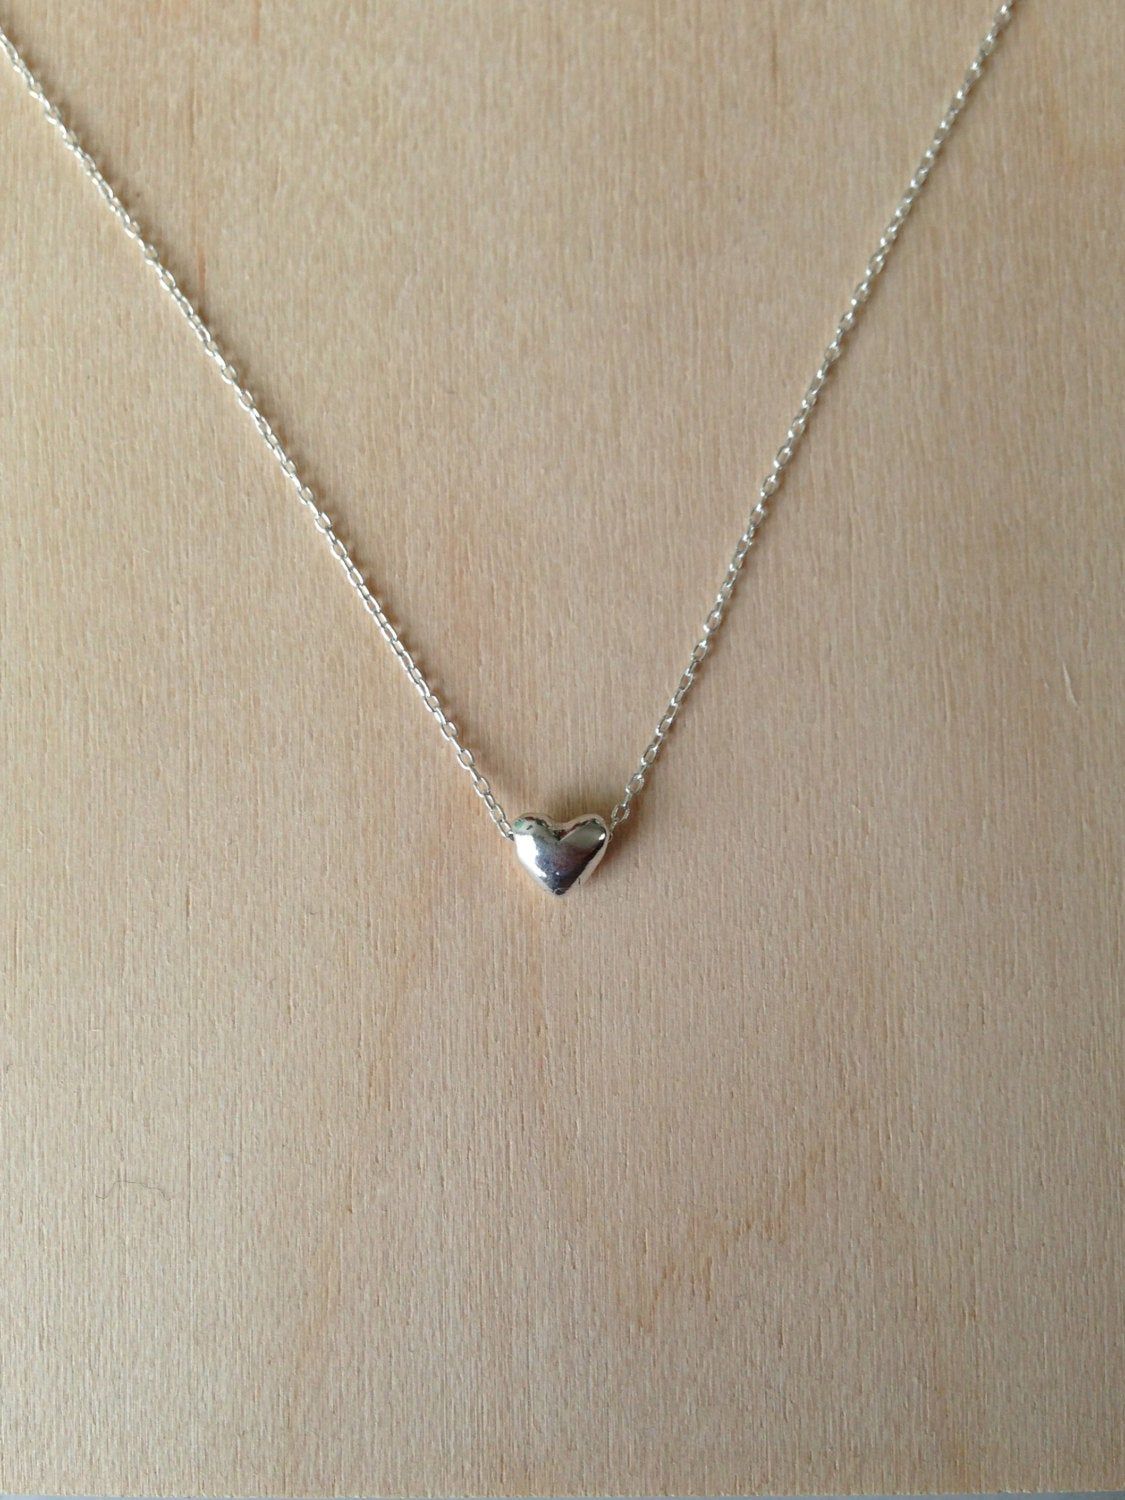 Pick the perfect silver heart necklace for your partner